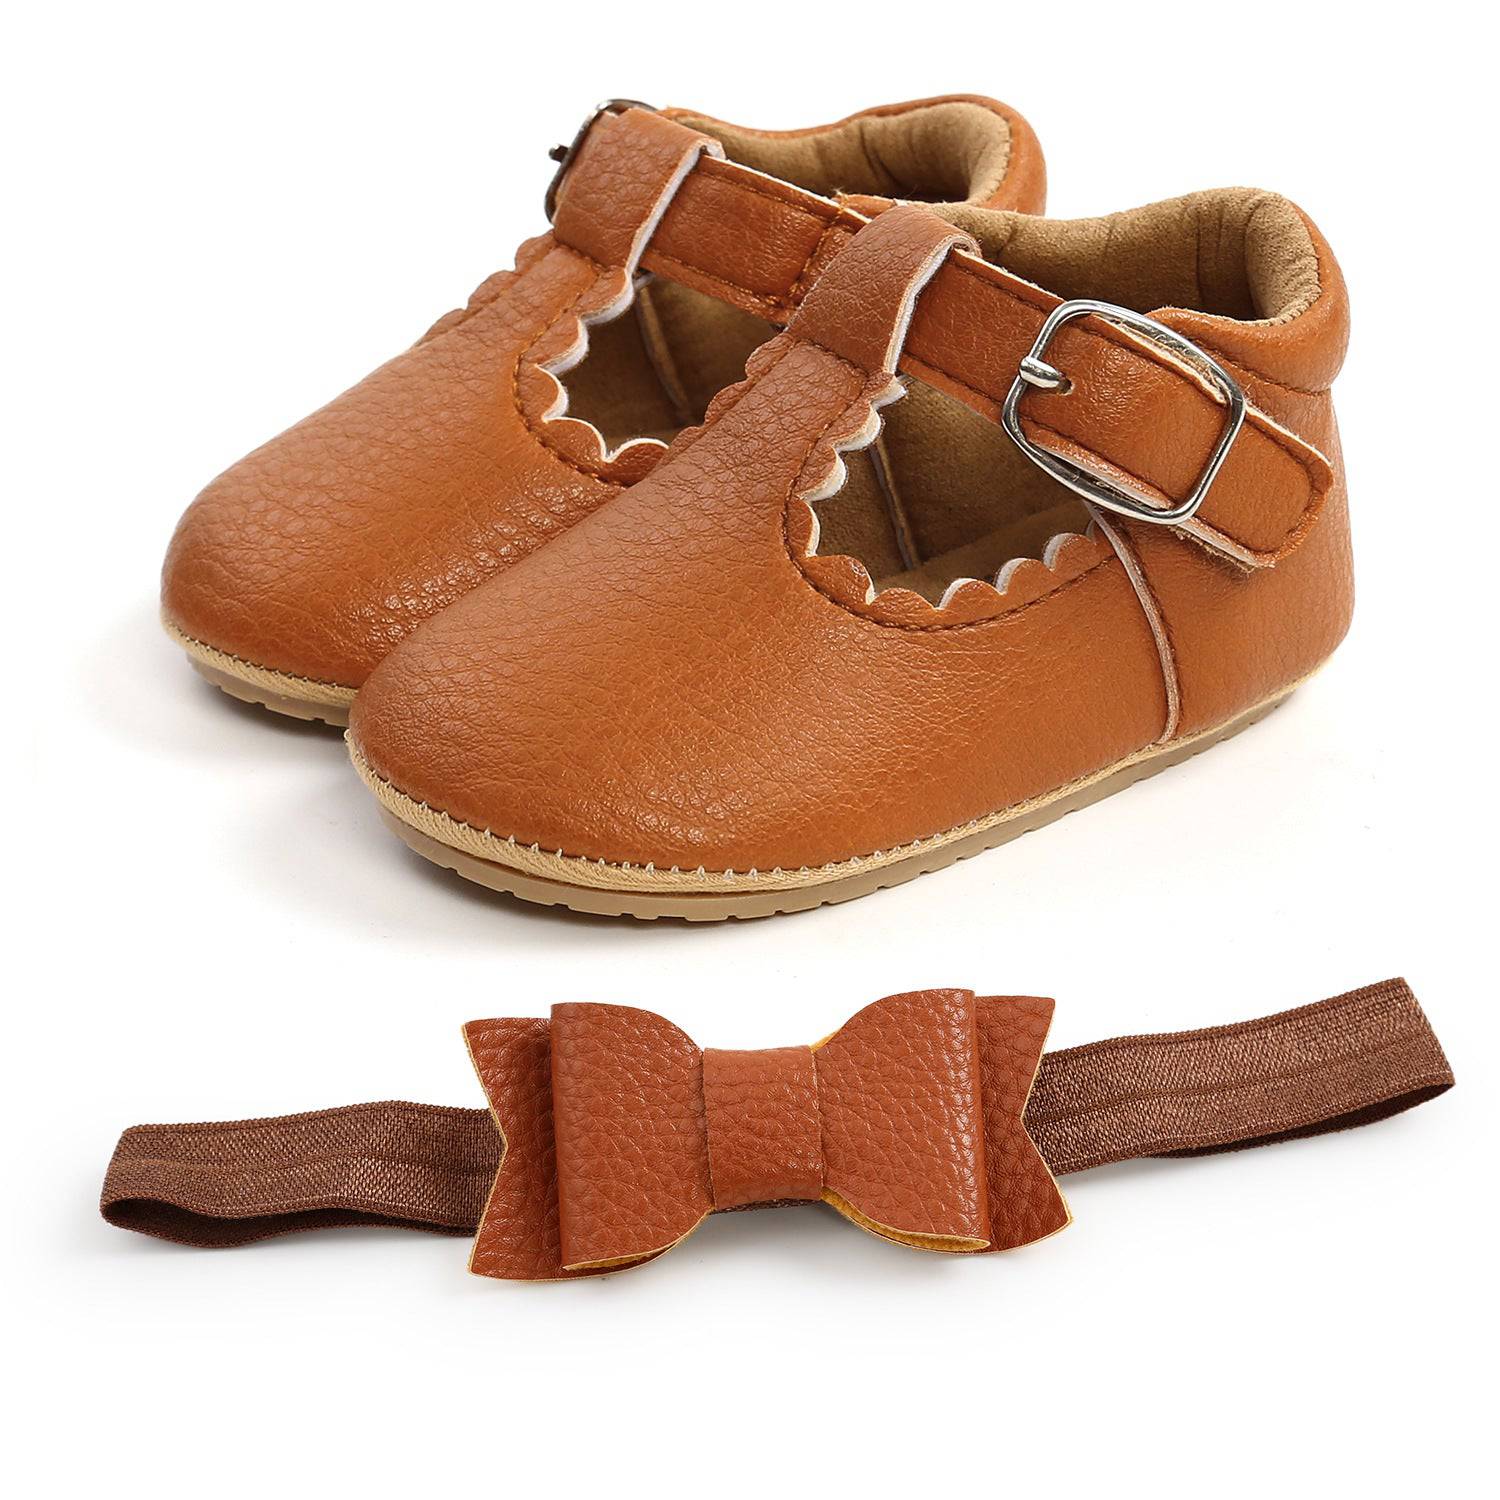 Leather Toddler Shoes - LITTLE BEDOUIN - baby dress فستان اطفال